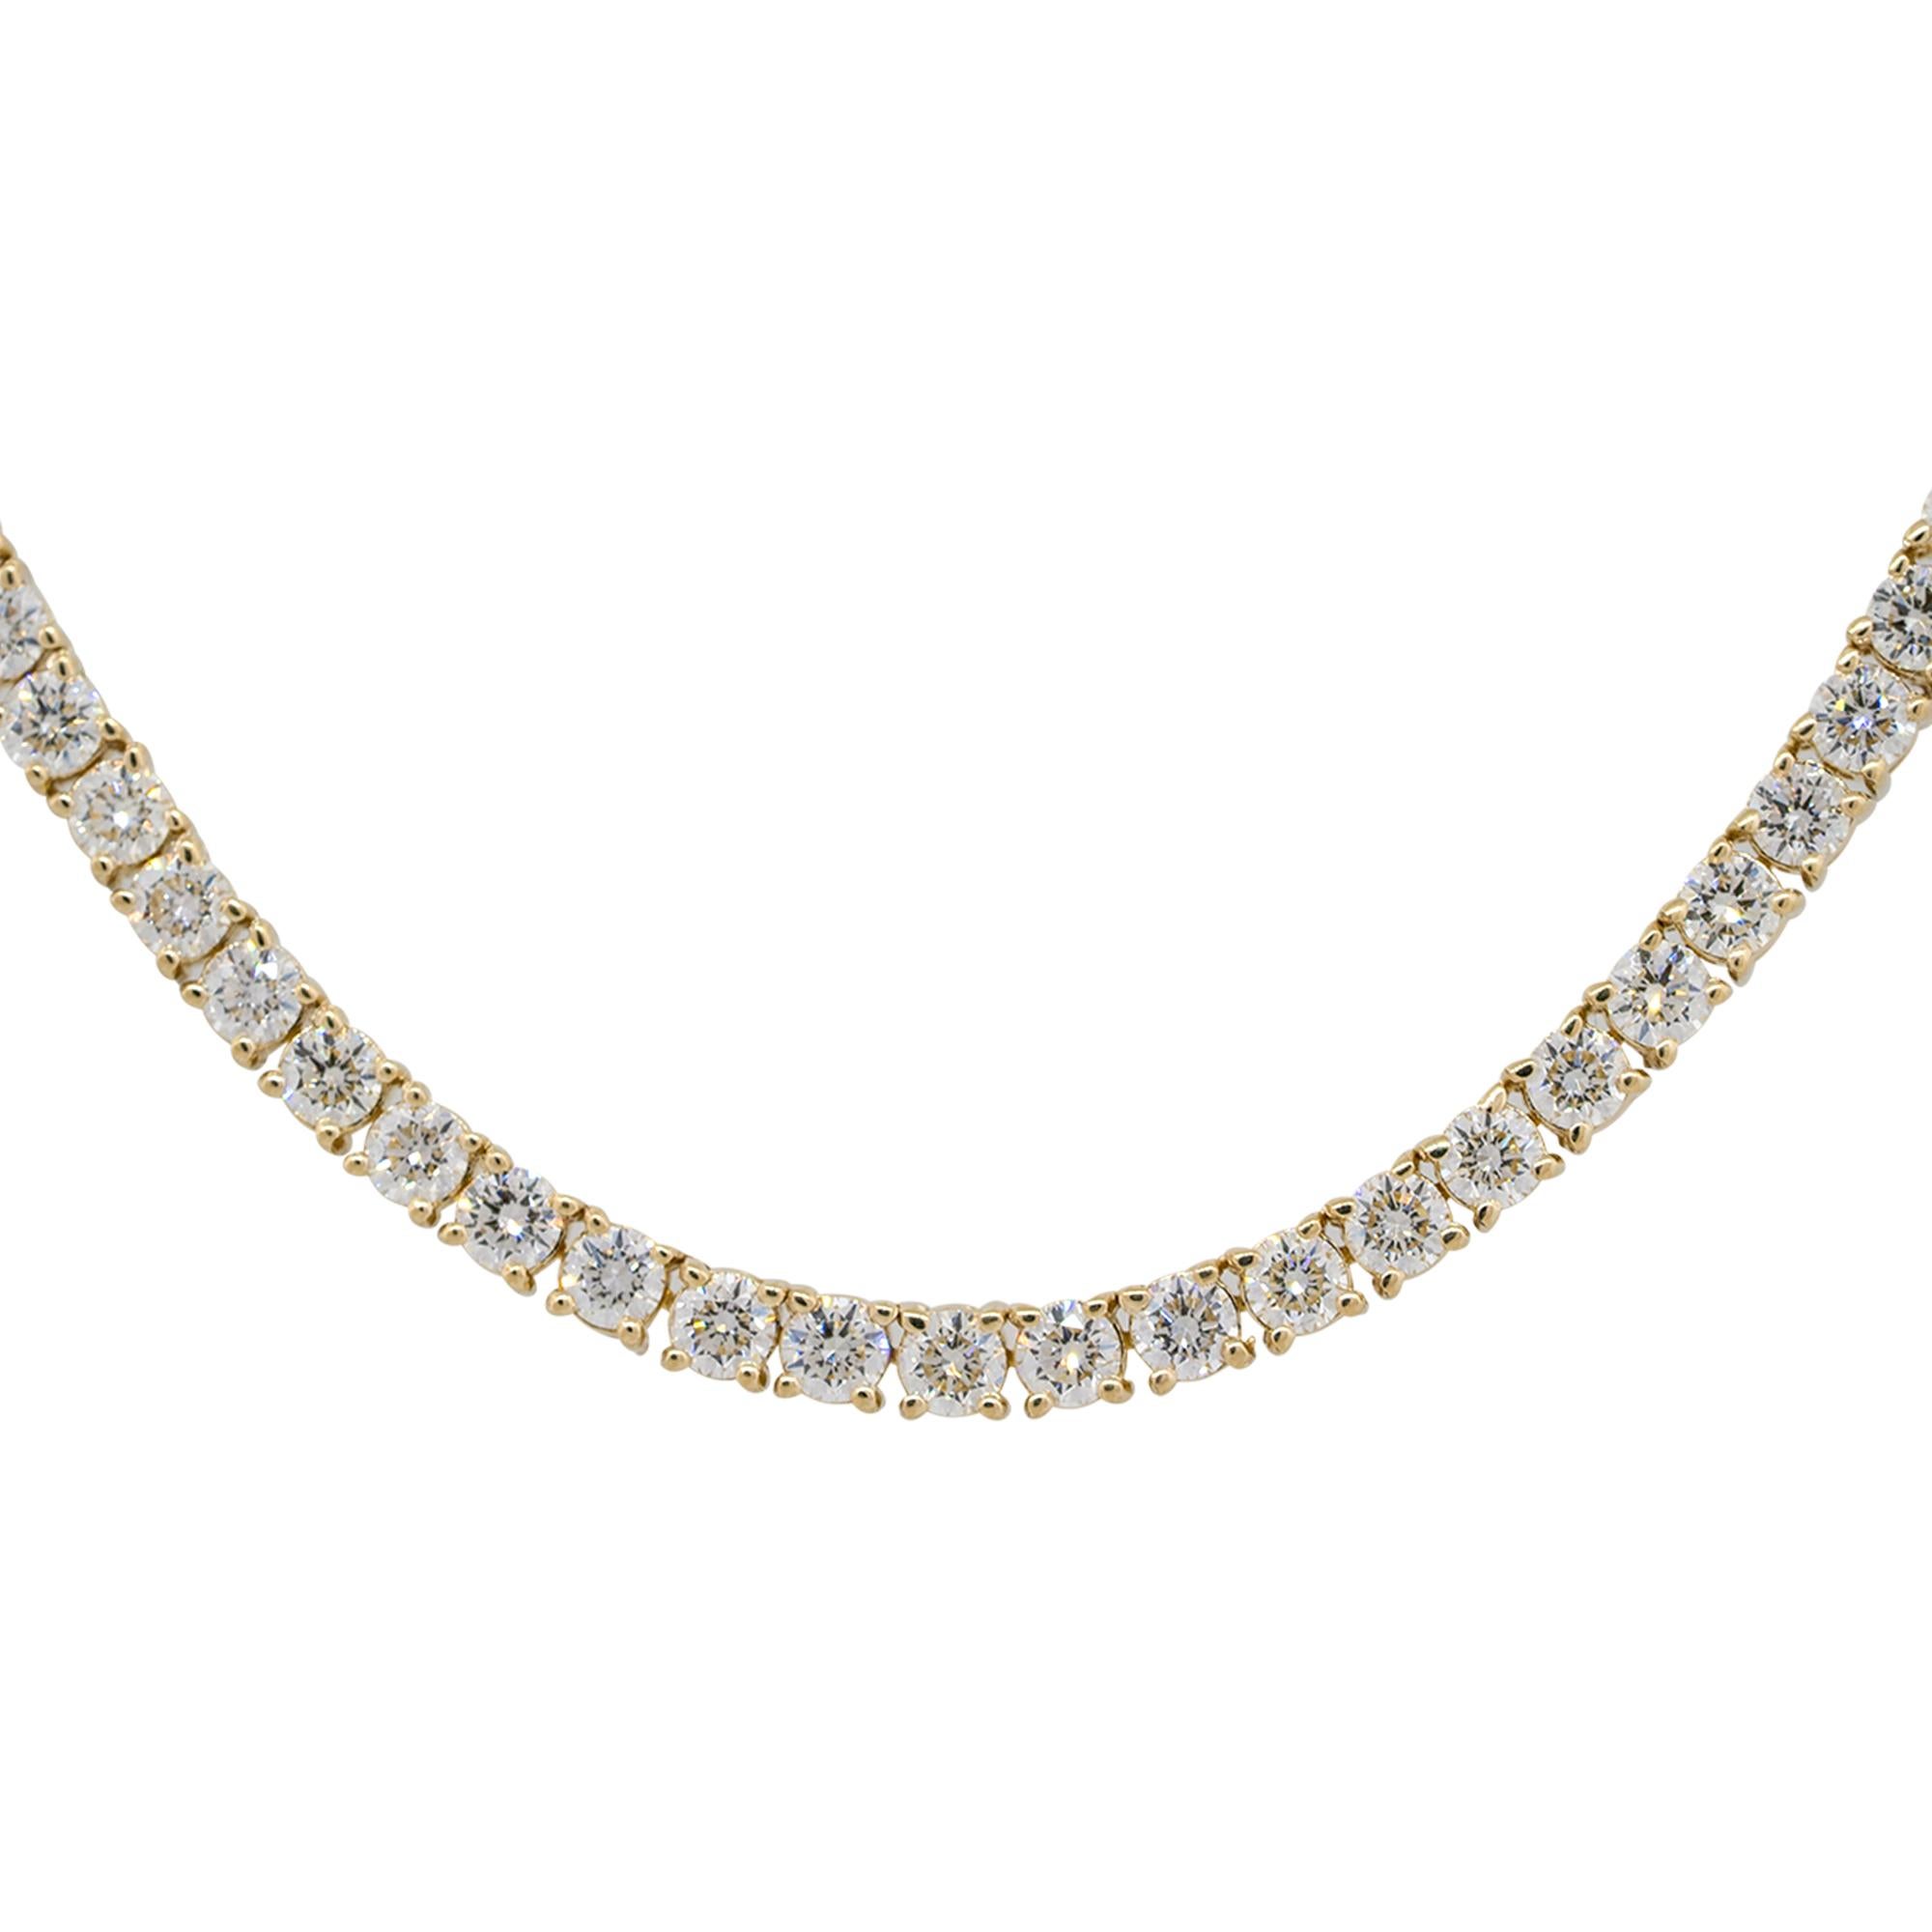 Material: 14k Yellow gold
Diamond Details: Approx. 7.08ctw of round cut Diamonds. Diamonds are G/H in color and VS in clarity
Clasps: Tongue in box with safety clasp
Total Weight: 15g (9.6dwt) 
Length: 16